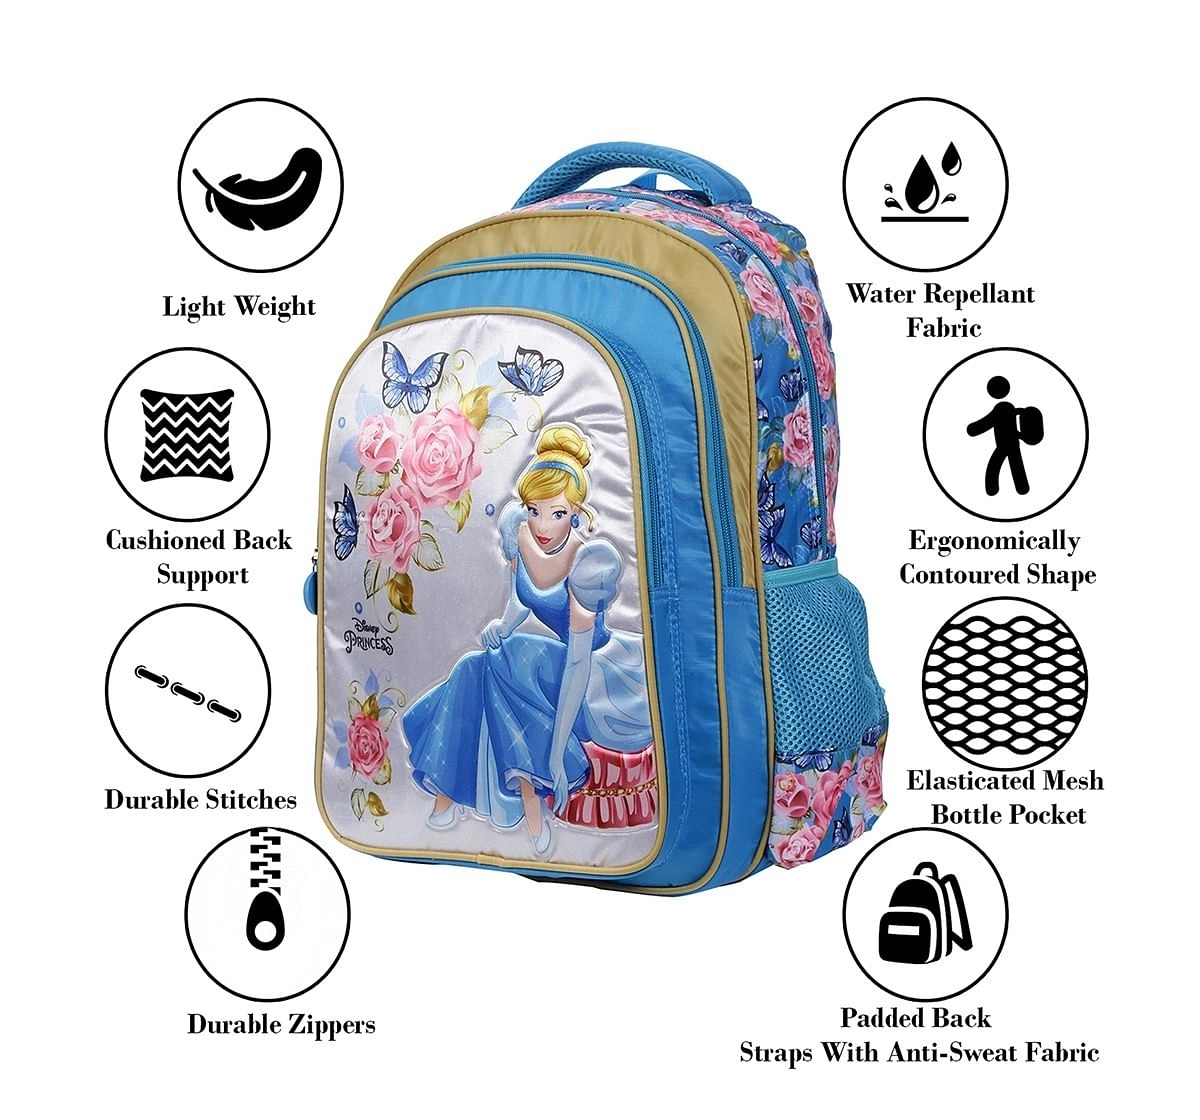 Disney Princess Travel In Style 16" Backpack Bags for age 3Y+ 